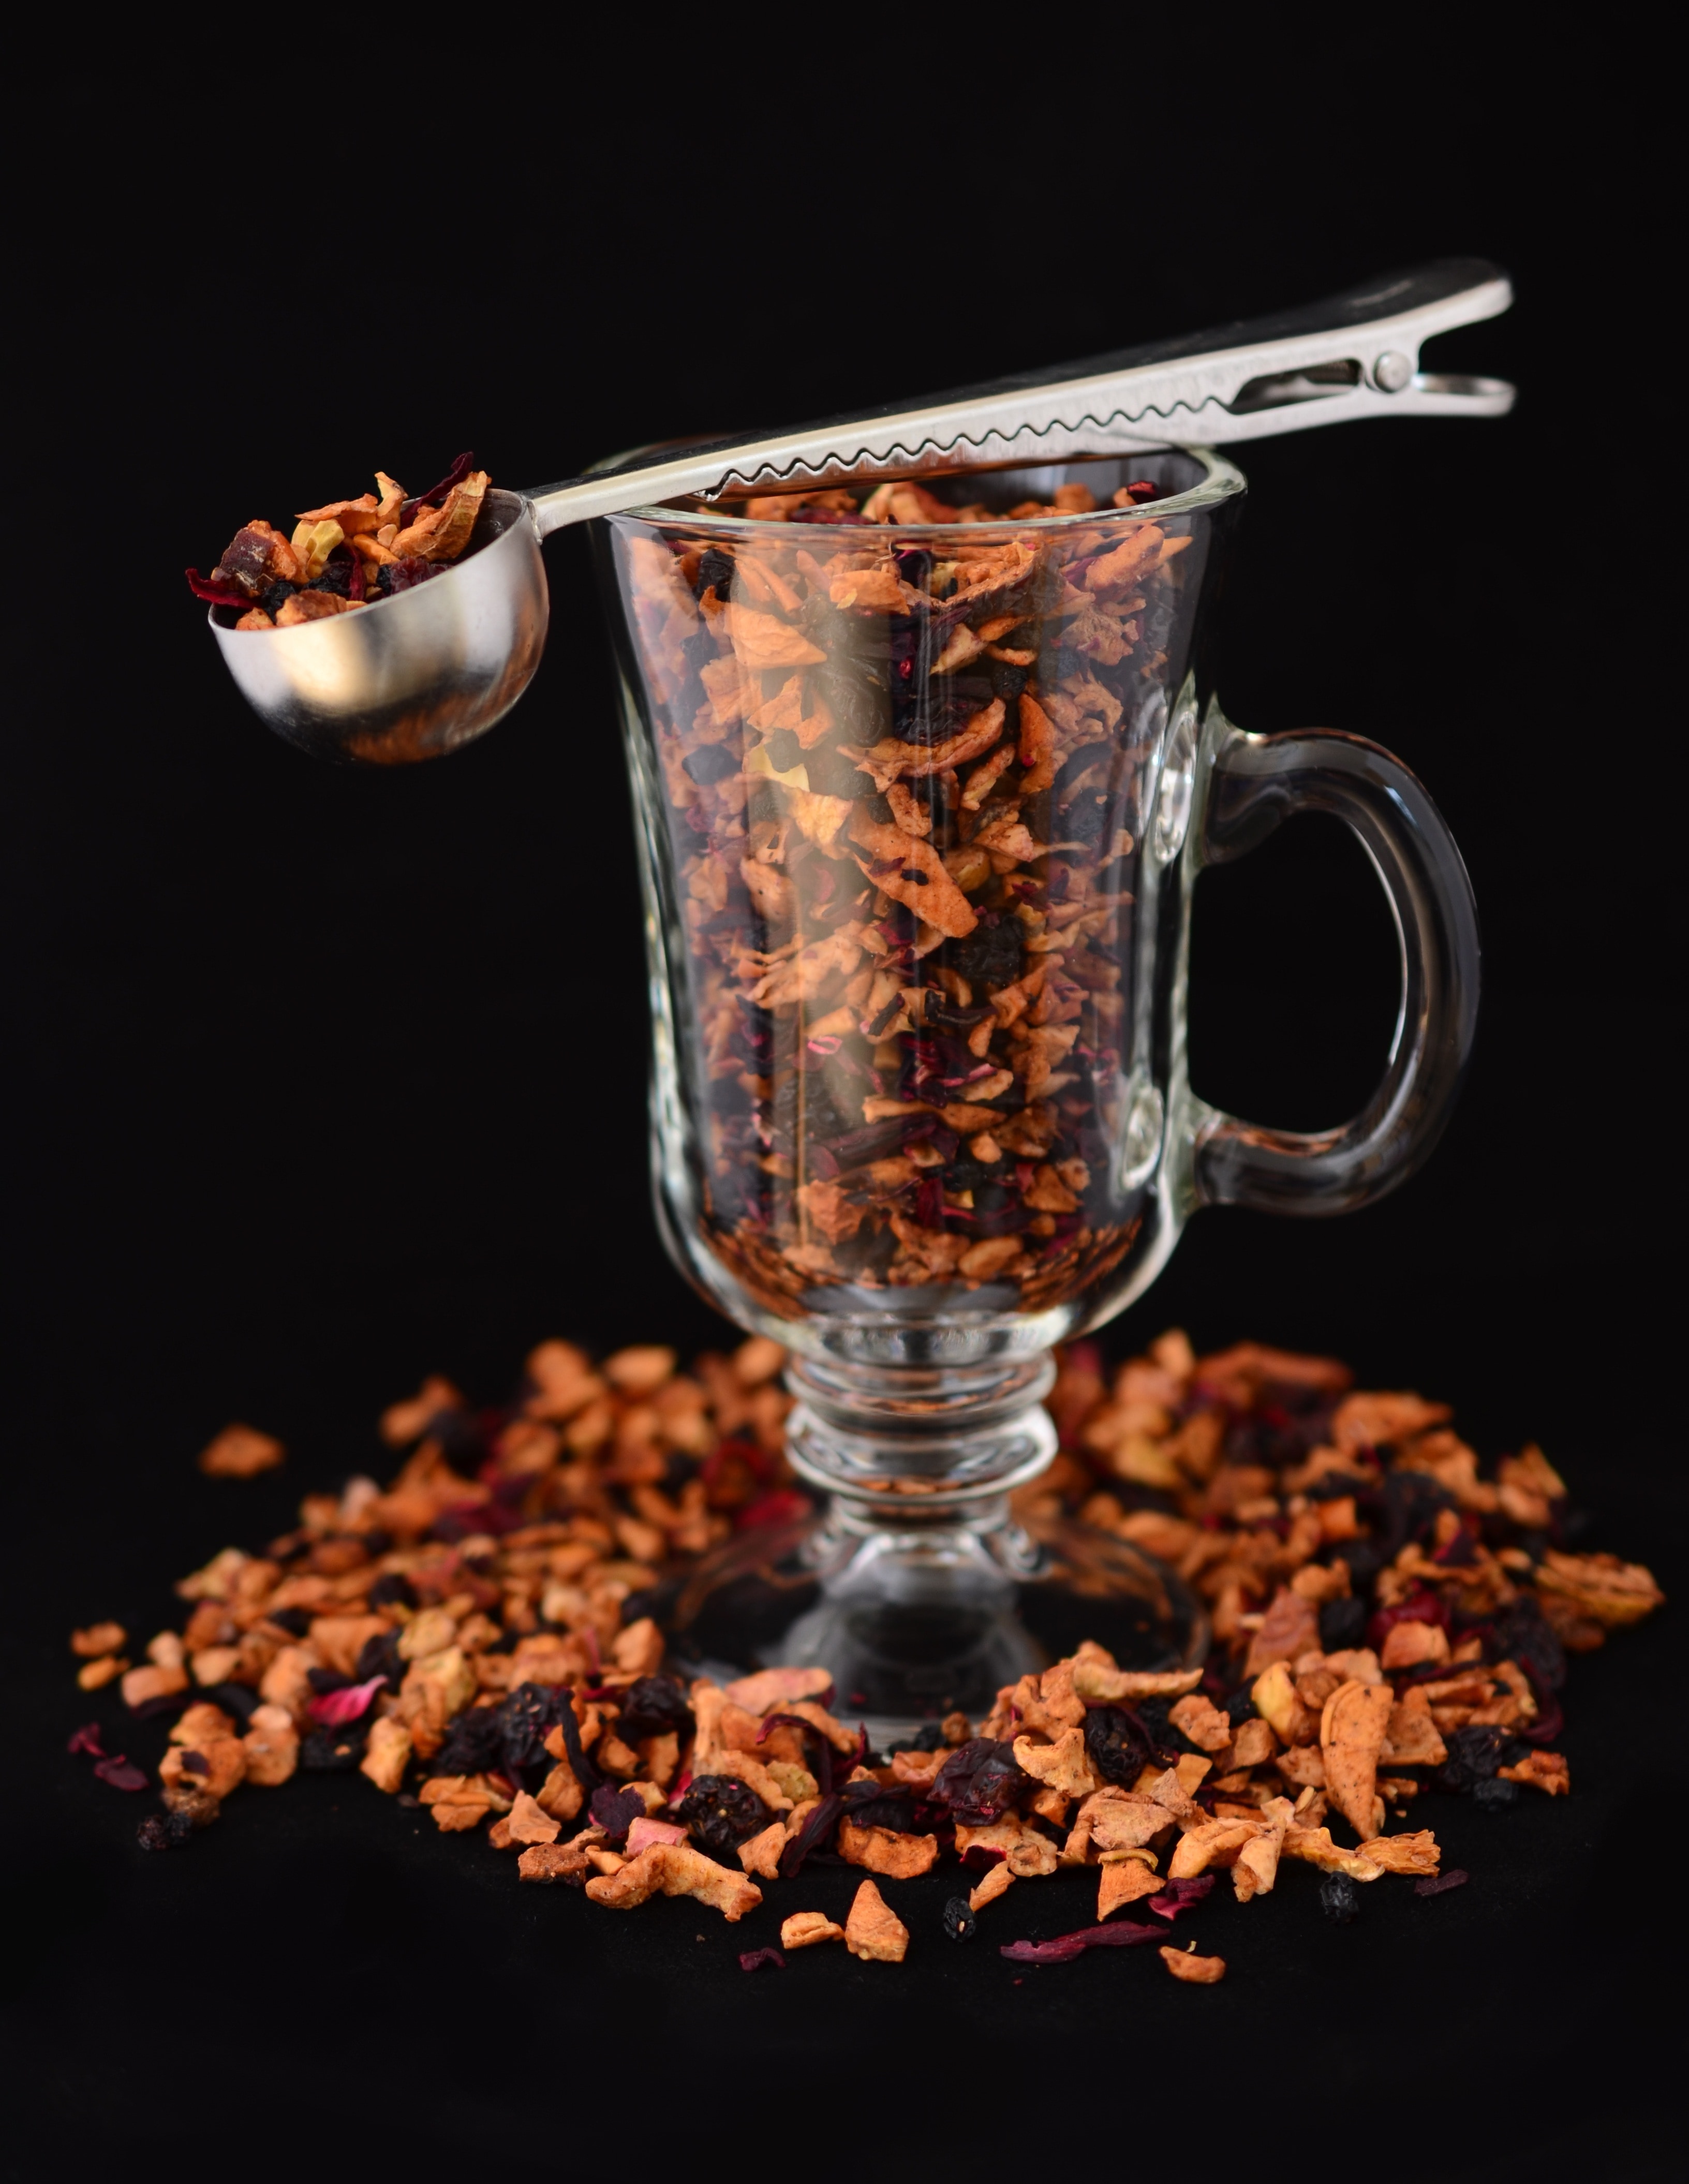 stainless steel scooper and clear glass mug filled with dried fruits